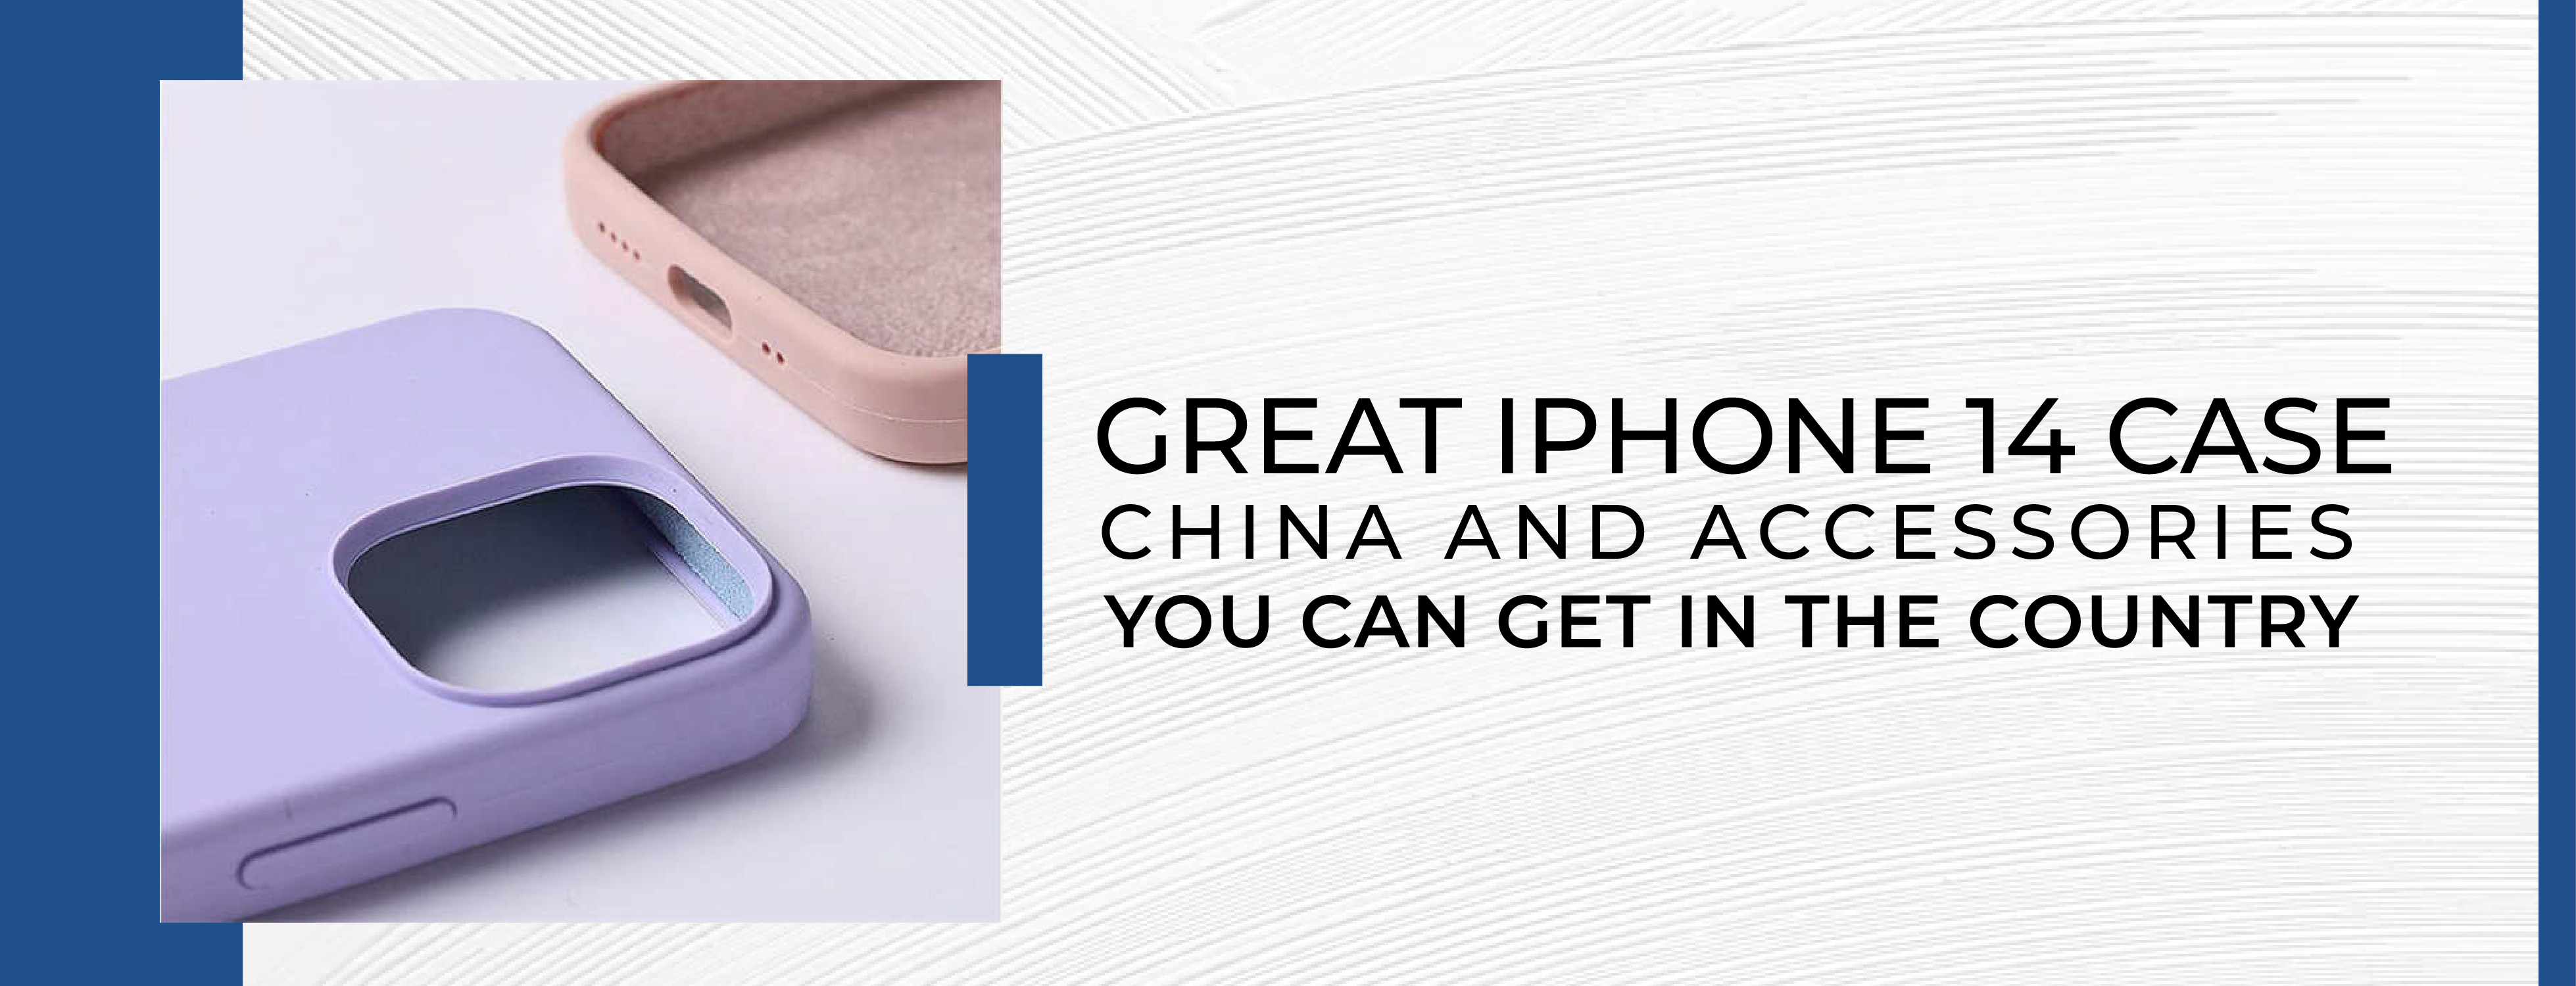 Great iPhone 14 case China and Accessories You Can Get in the country!!